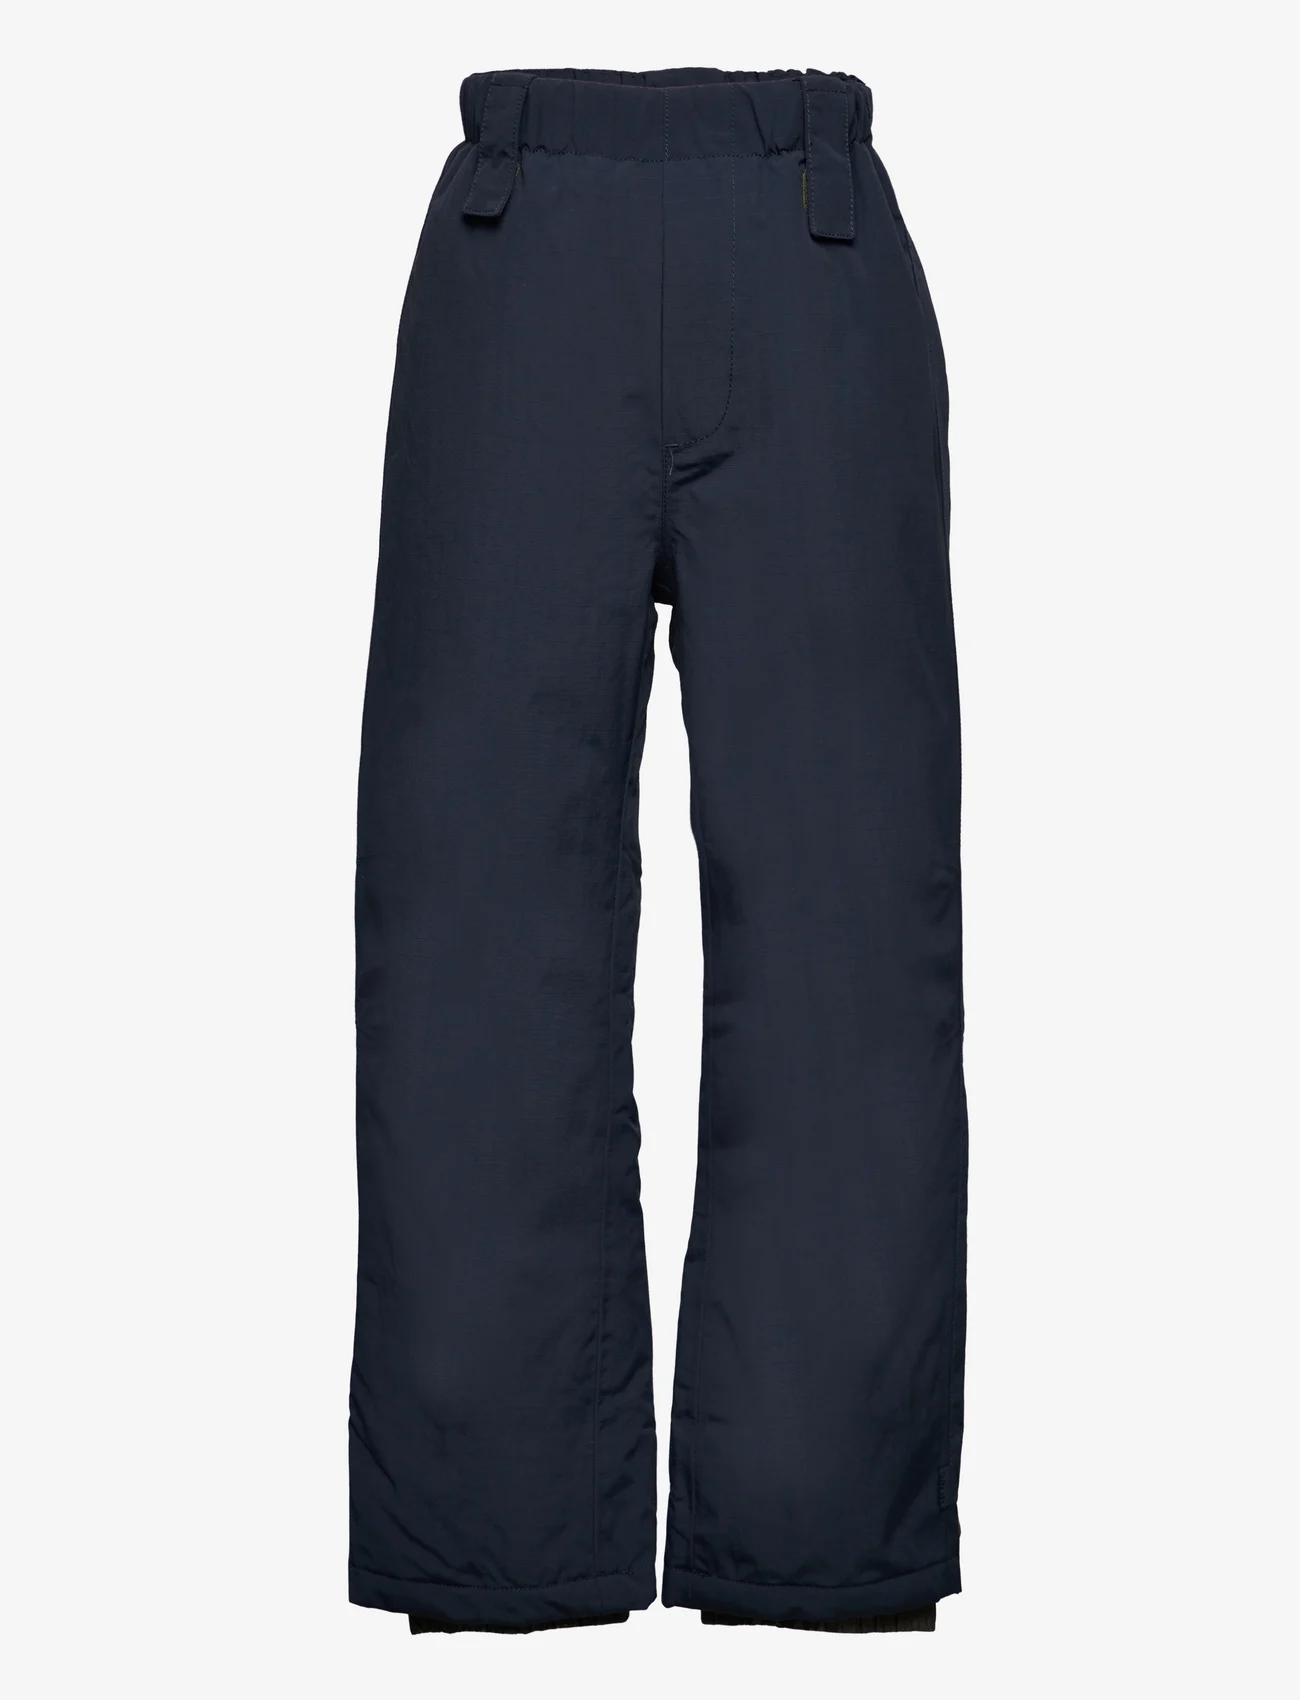 Molo - Paxton - winter trousers - night navy - 0